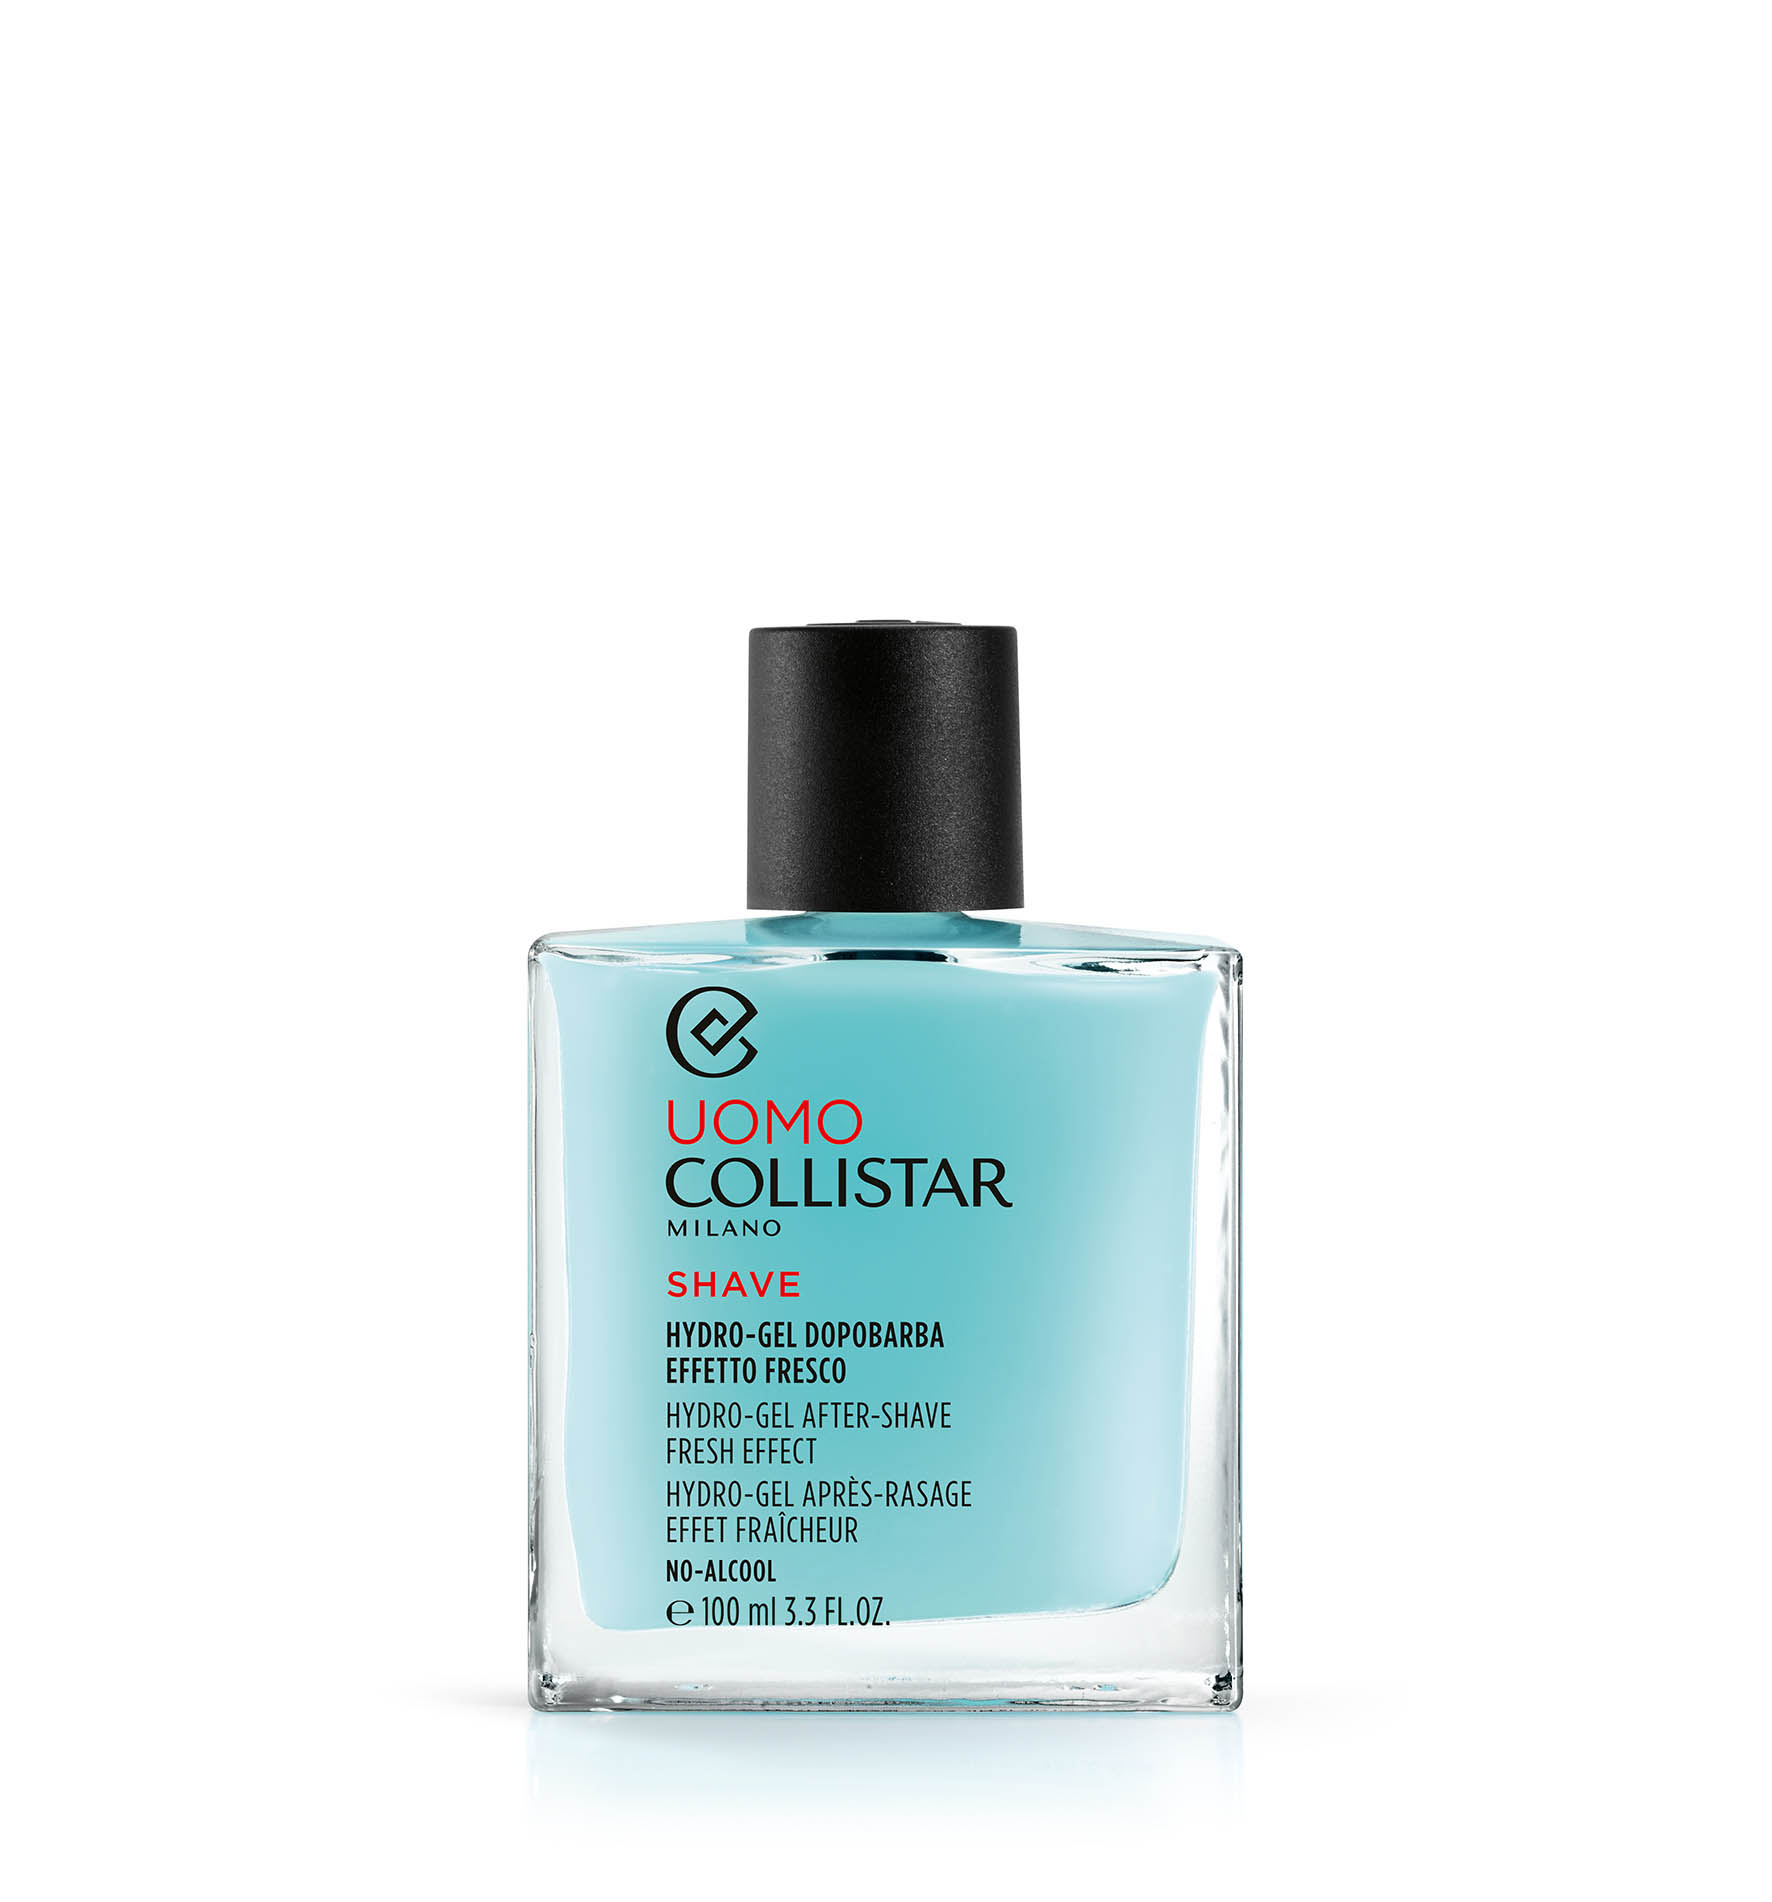 HYDRO-GEL AFTER-SHAVE FRESH EFFECT - ALCOHOL-FREE - Hydration | Collistar - Shop Online Ufficiale